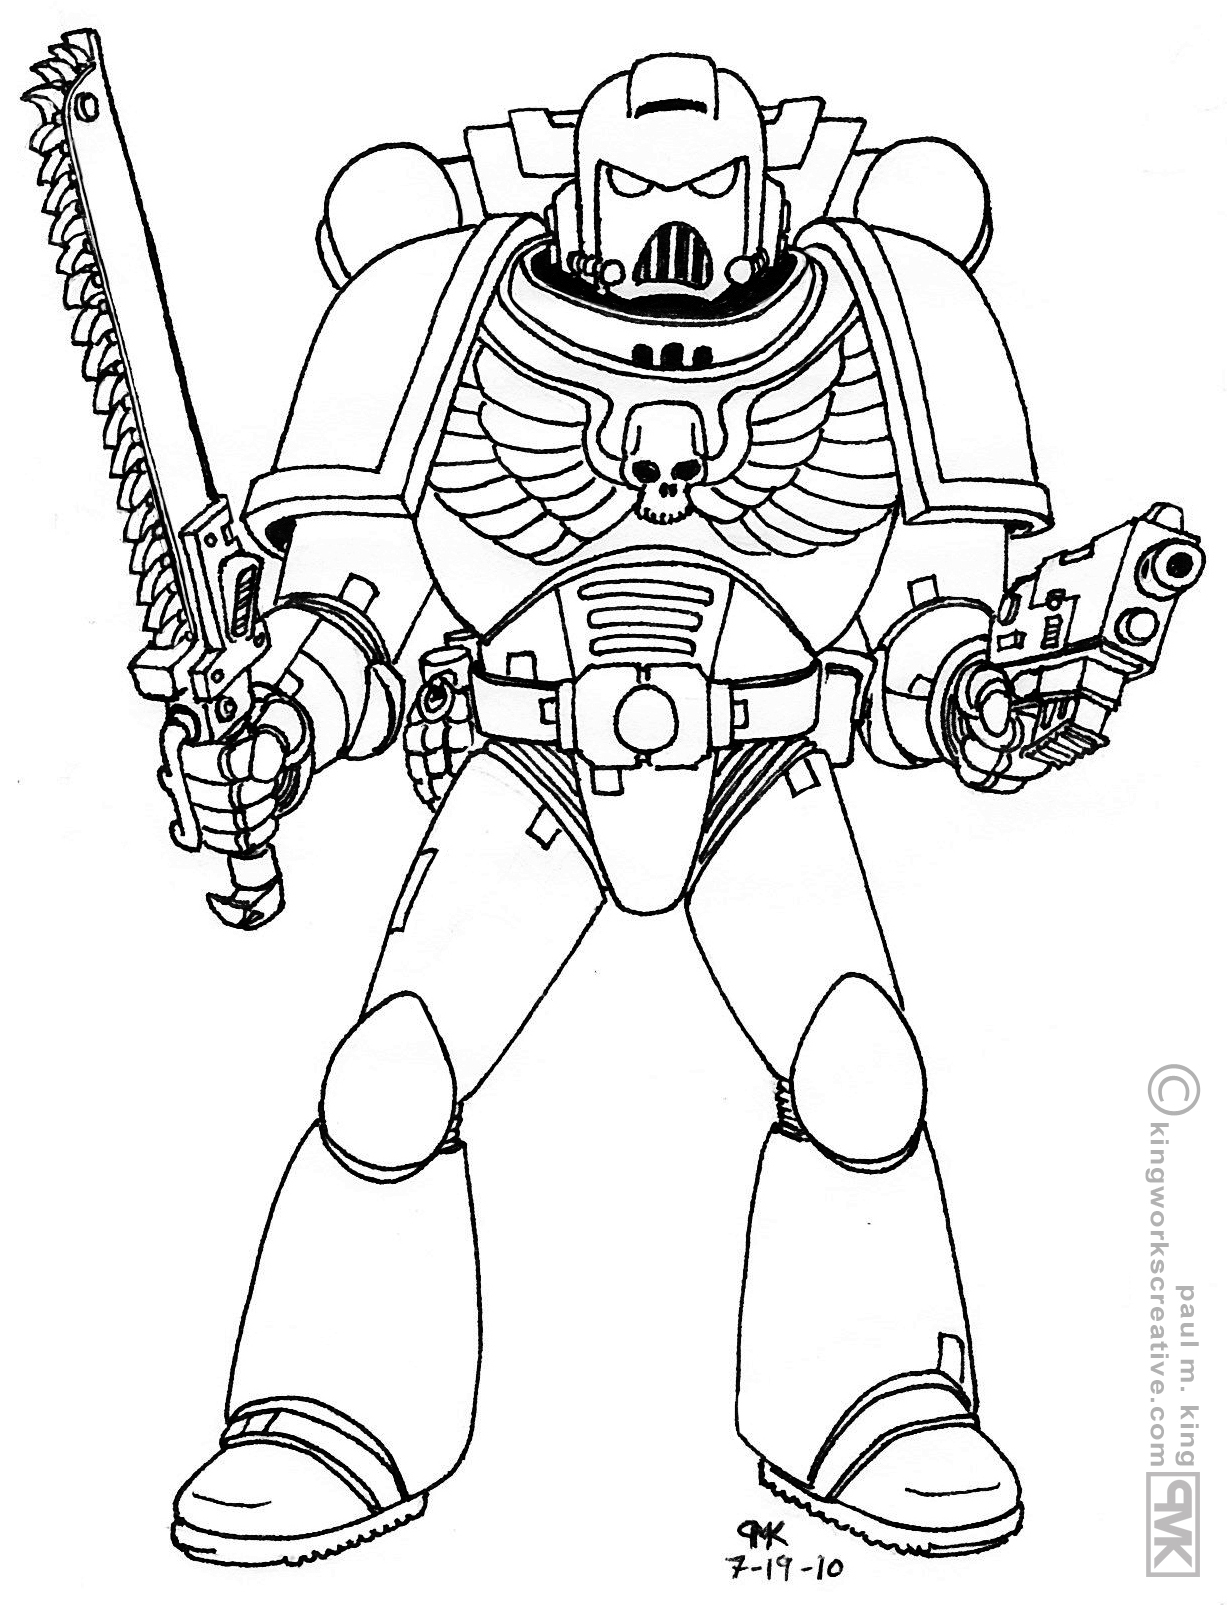 Warhammer coloring pages